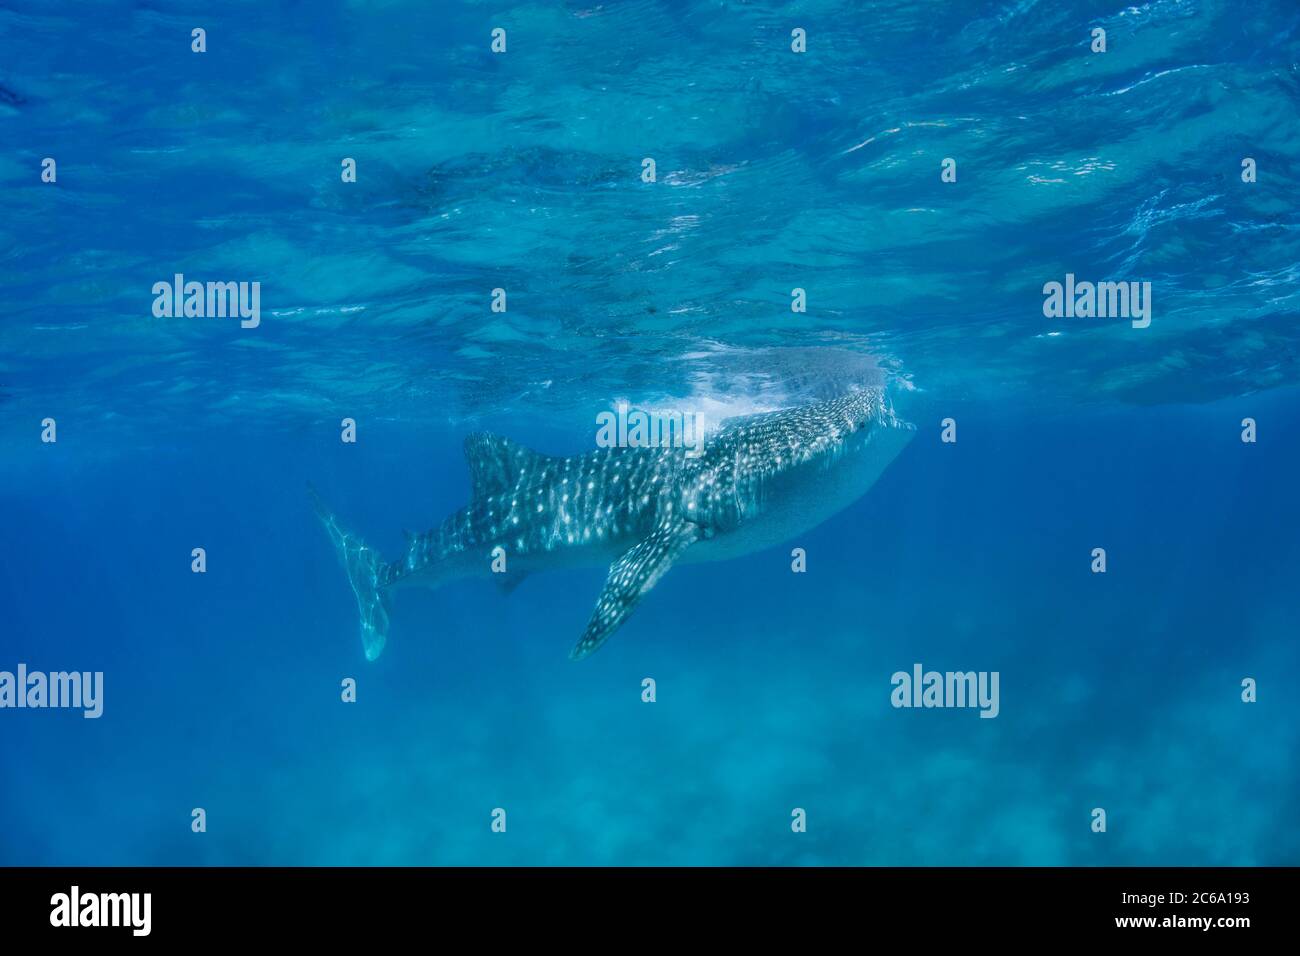 A whale shark, Rhiniodon typus, with its mouth open, filter feeding at the surface, Philippines. This is the worlds largest species of fish. Stock Photo